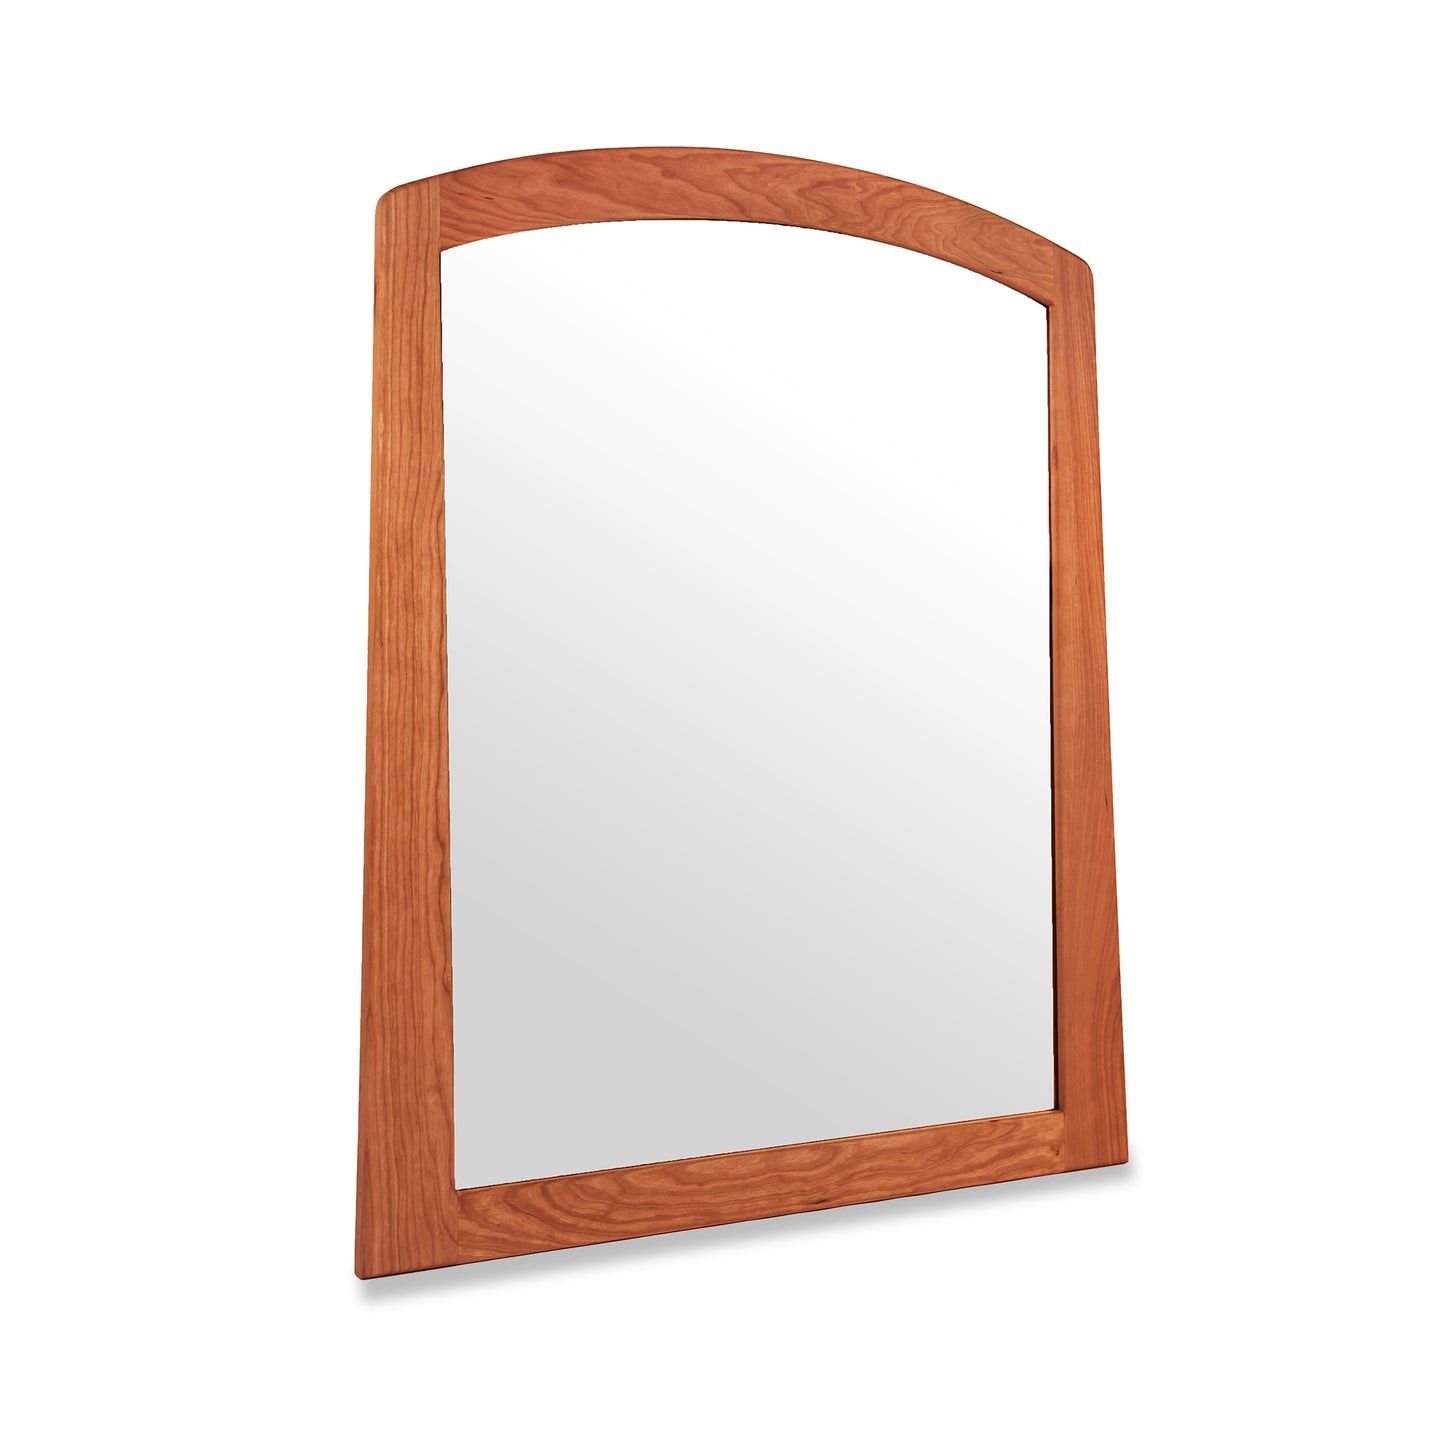 A Maple Corner Woodworks Cherry Moon Vertical Mirror, made from sustainably harvested solid wood with a wooden-framed rectangular shape and curved top corners, isolated on a white background.